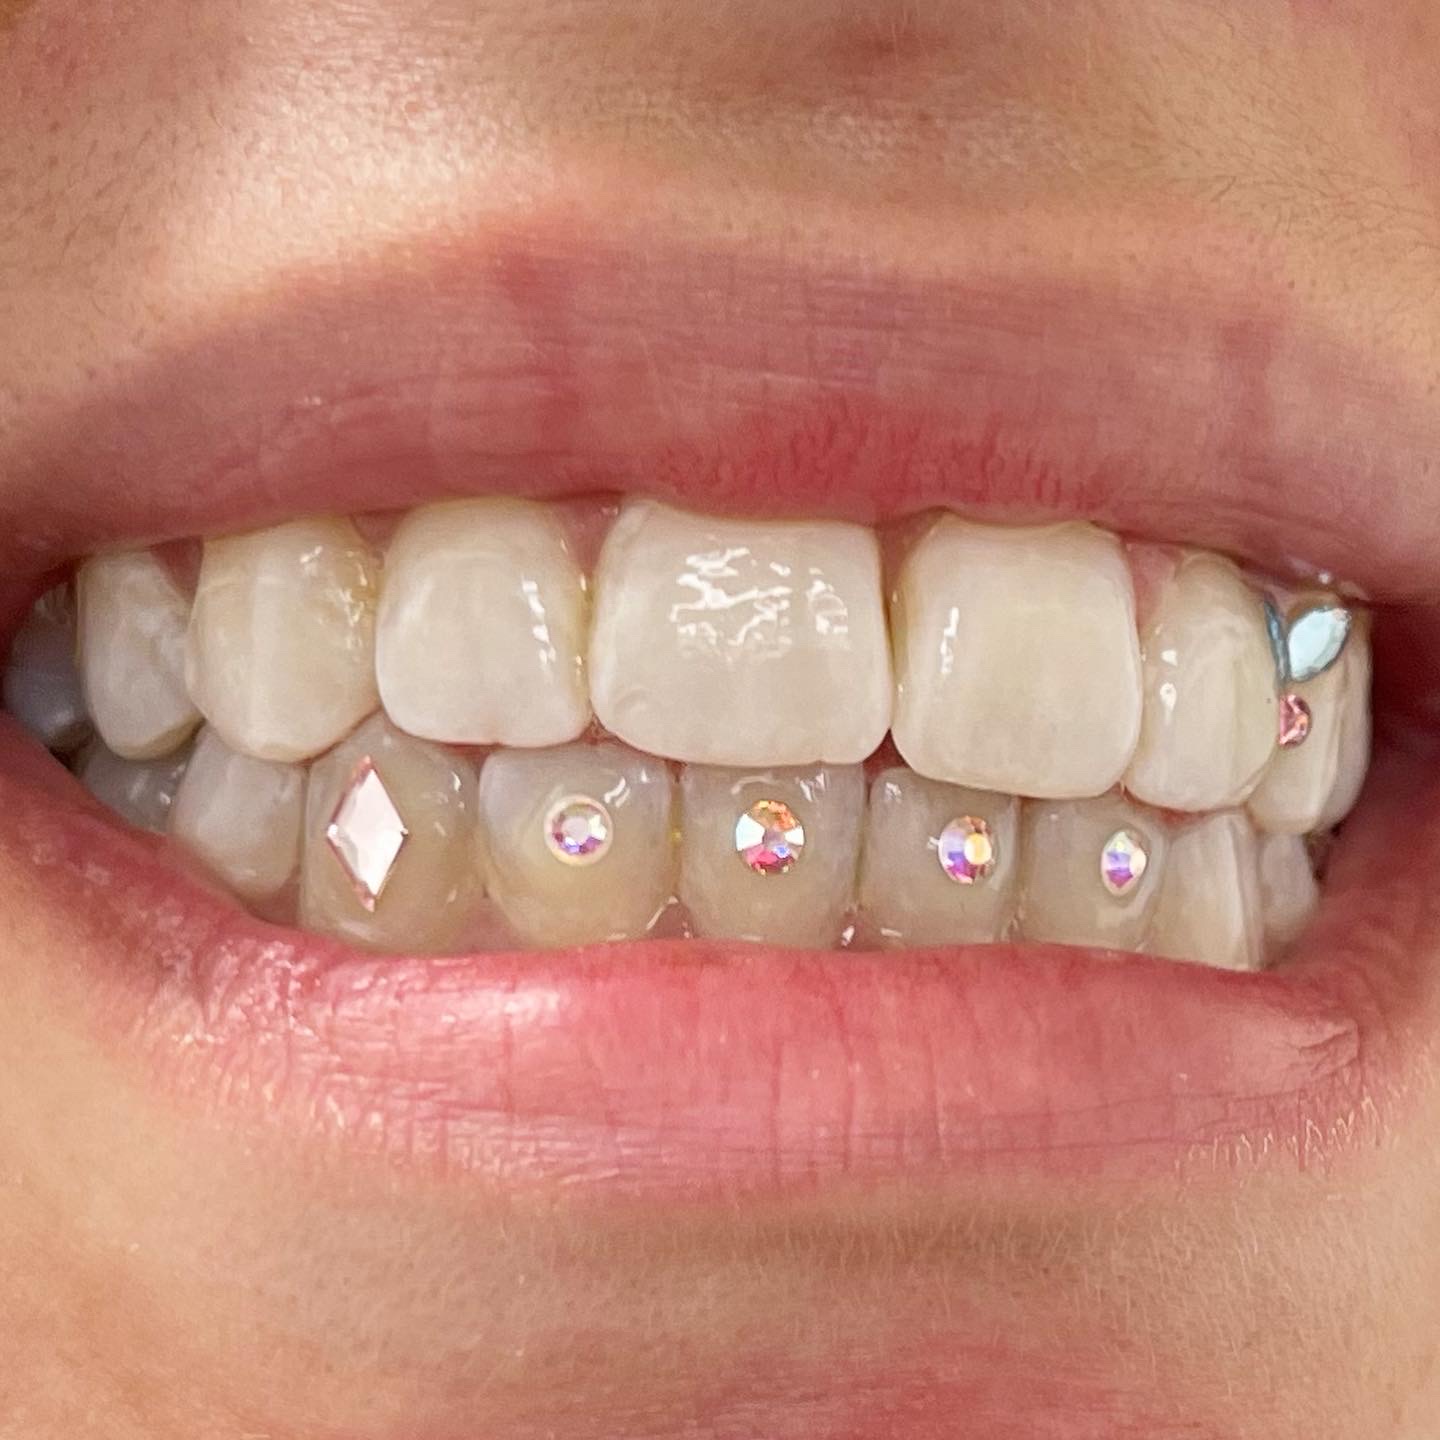 Tooth Gems: Are They Safe for Your Teeth?